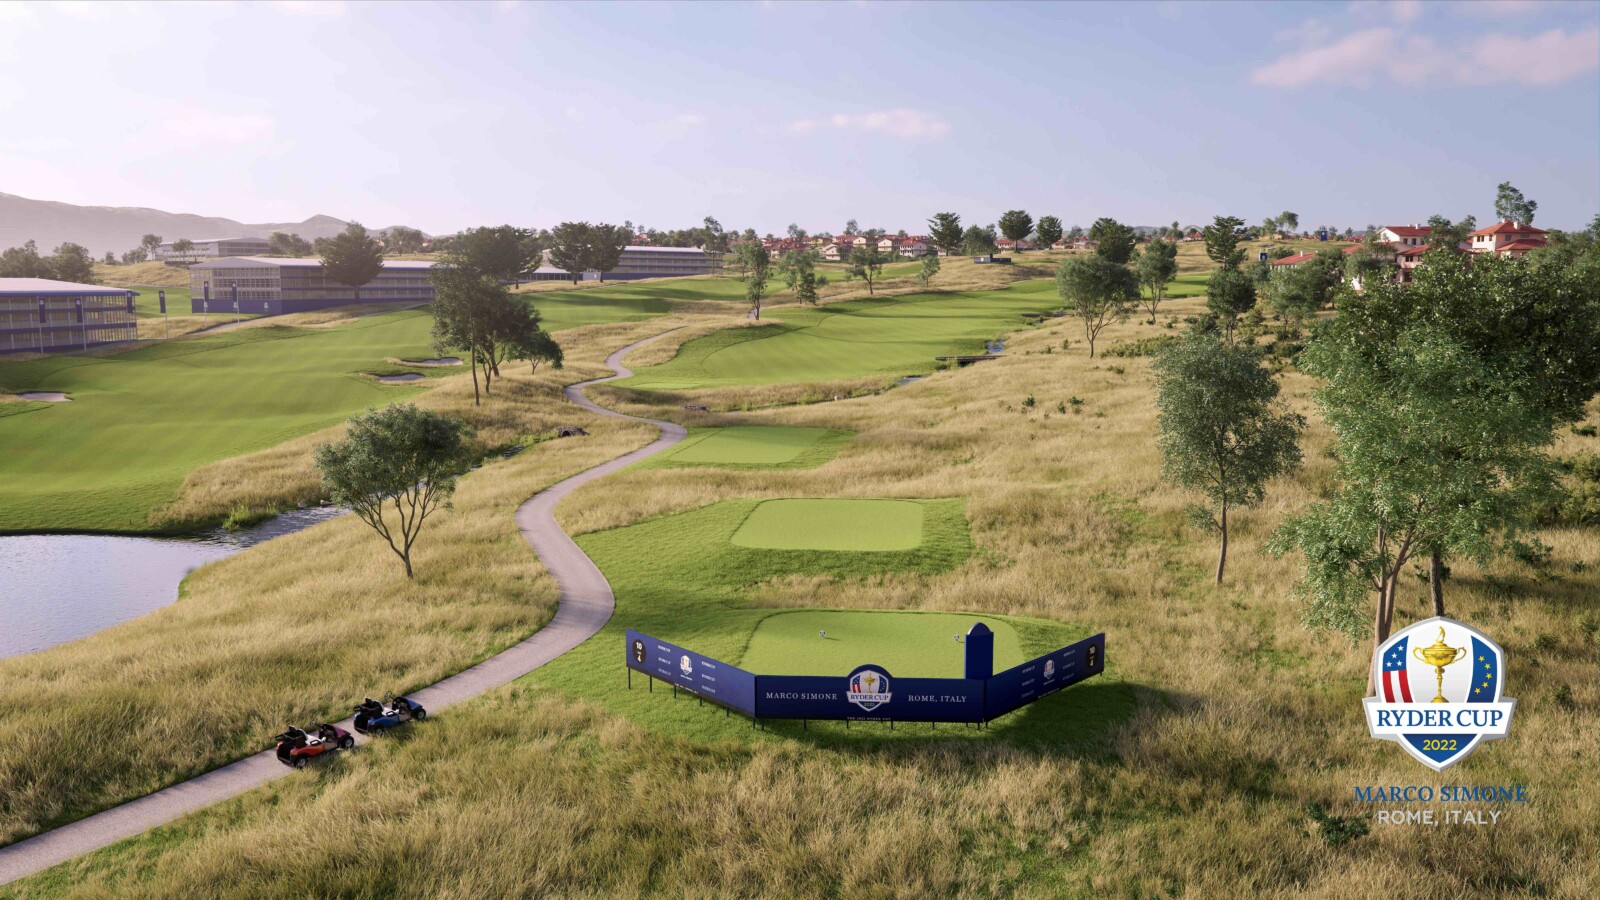 PLAY THE GOLF LOTTERY TO WIN A 7-NIGHT EUROPEAN CRUISE WITH RYDER CUP TICKETS